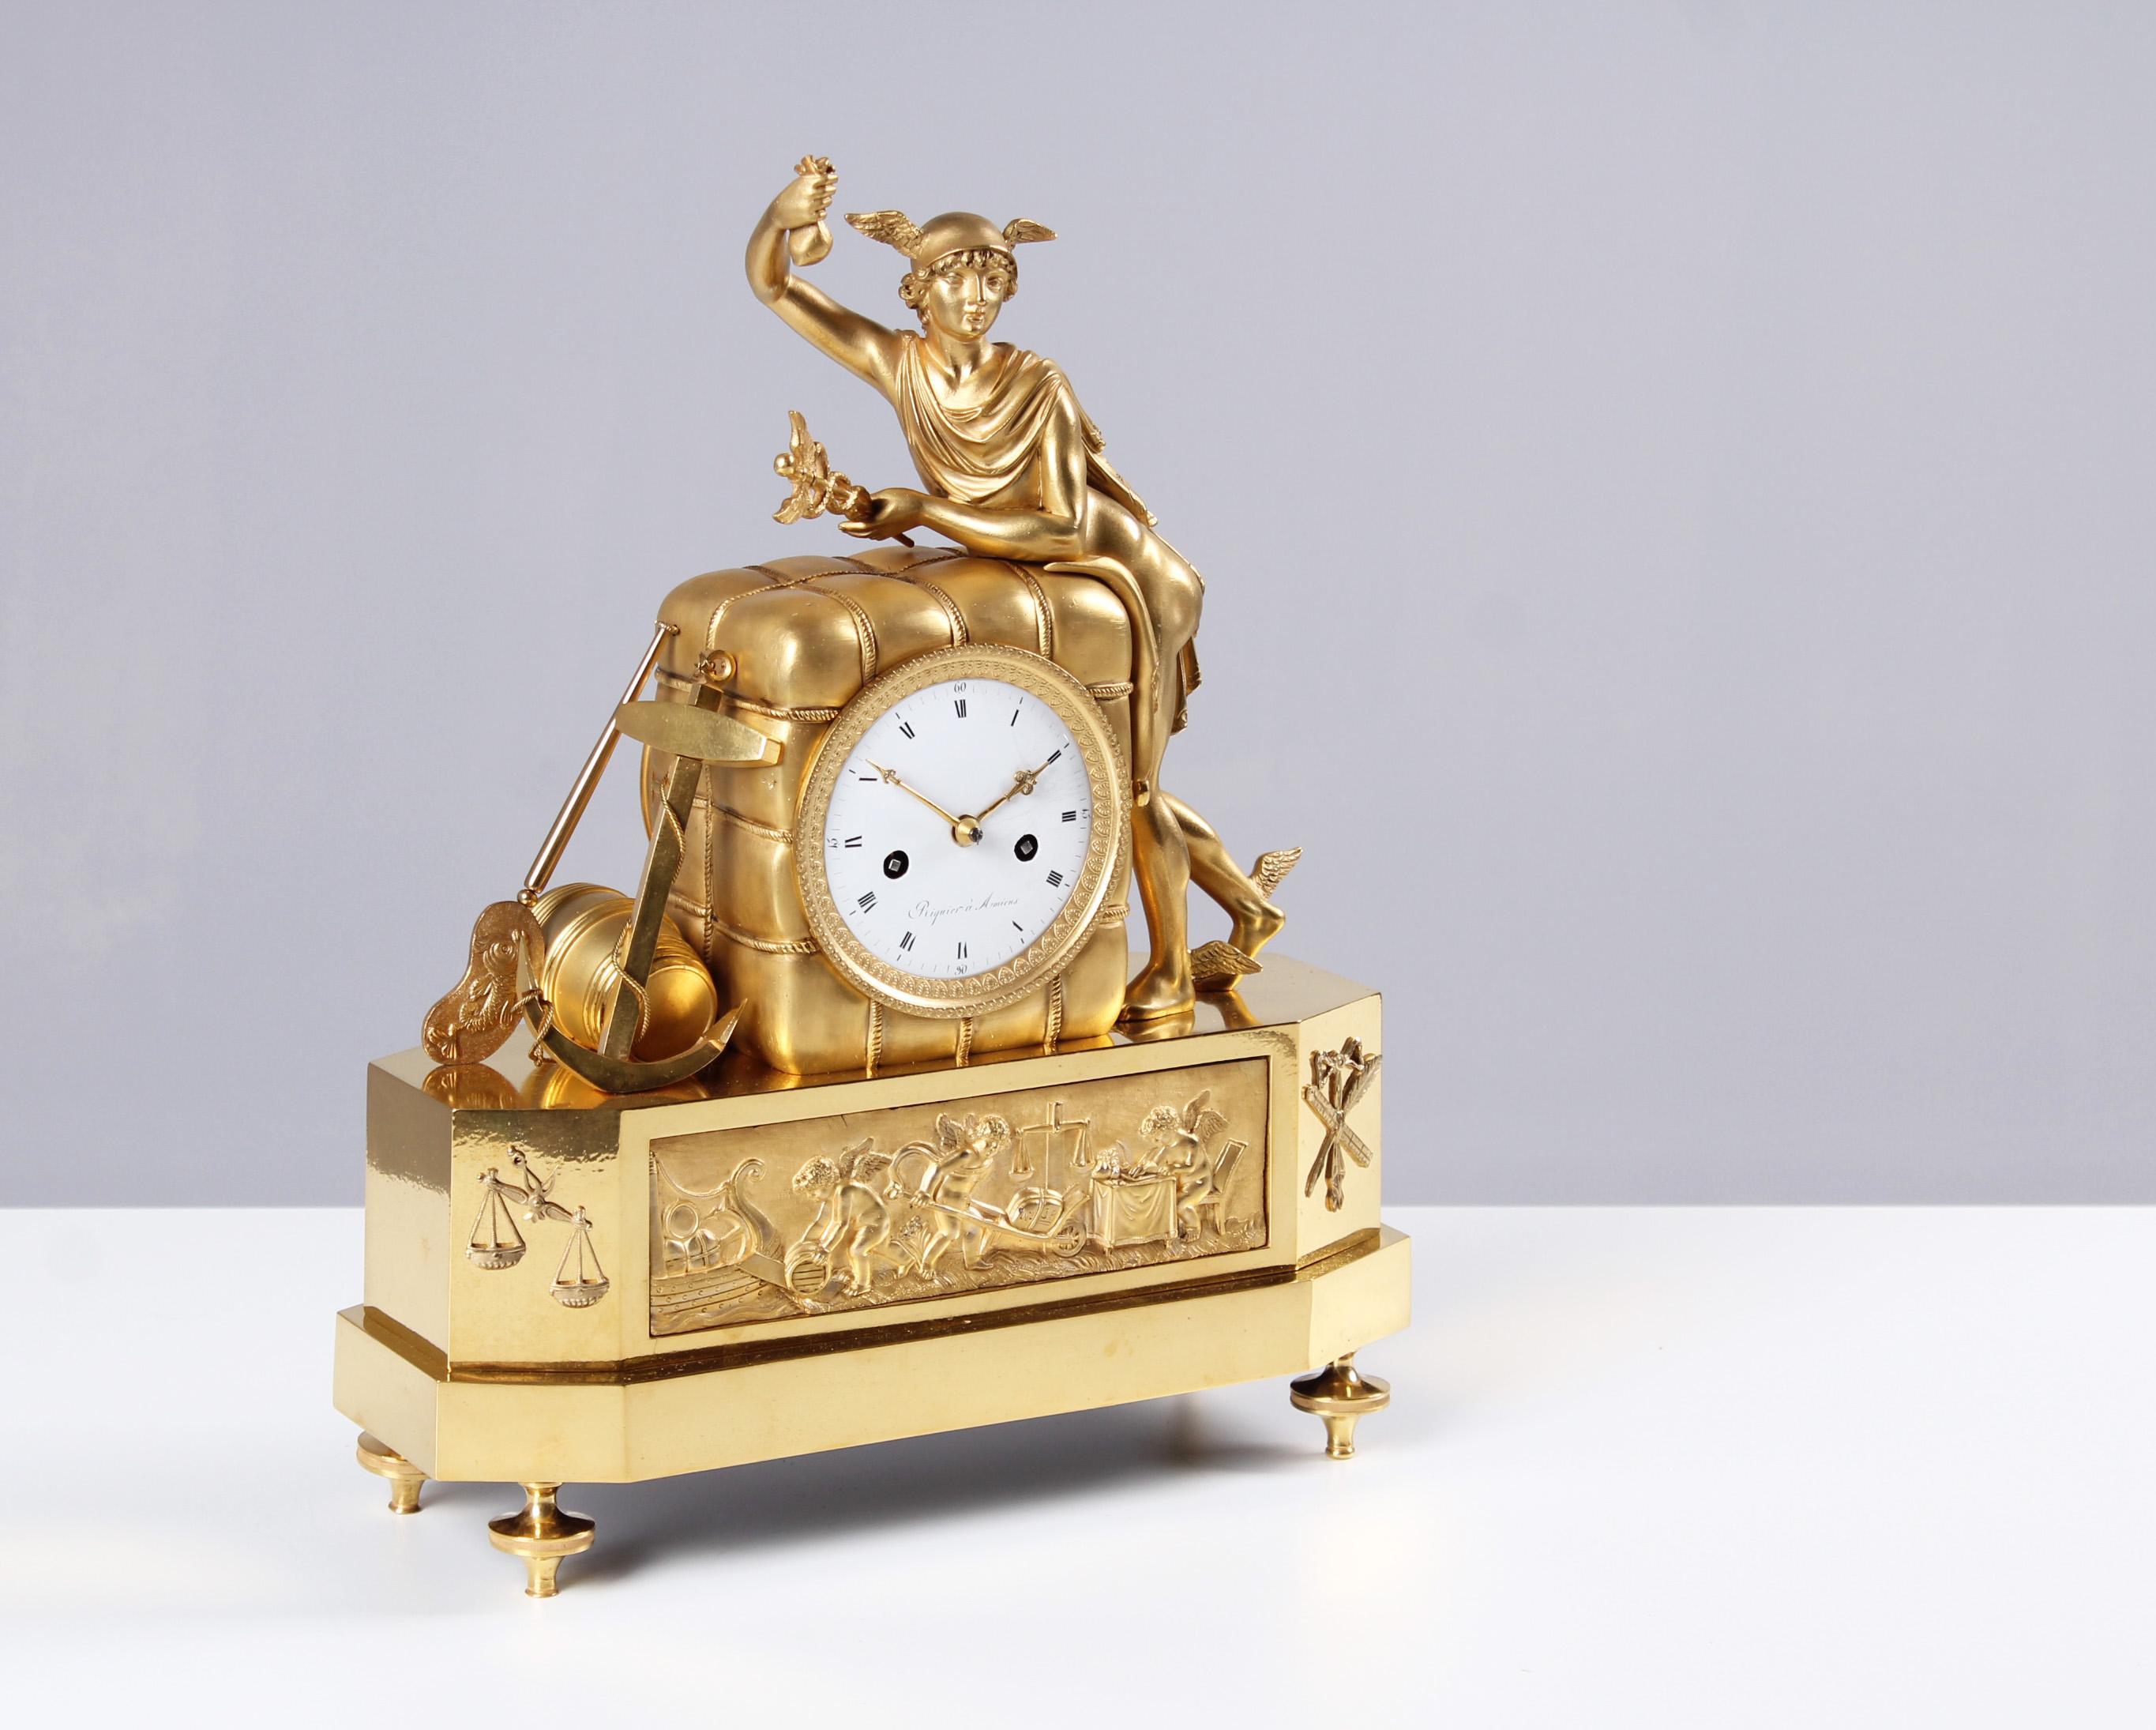 19th century French pendule, mantel clock - Mercury the messenger of the gods

France
Bronze gilded
Empire around 1815

Dimensions: H x W x D: 37 x 30 x 10 cm

Description:
French Empire pendule depicting Mercury, the messenger of the